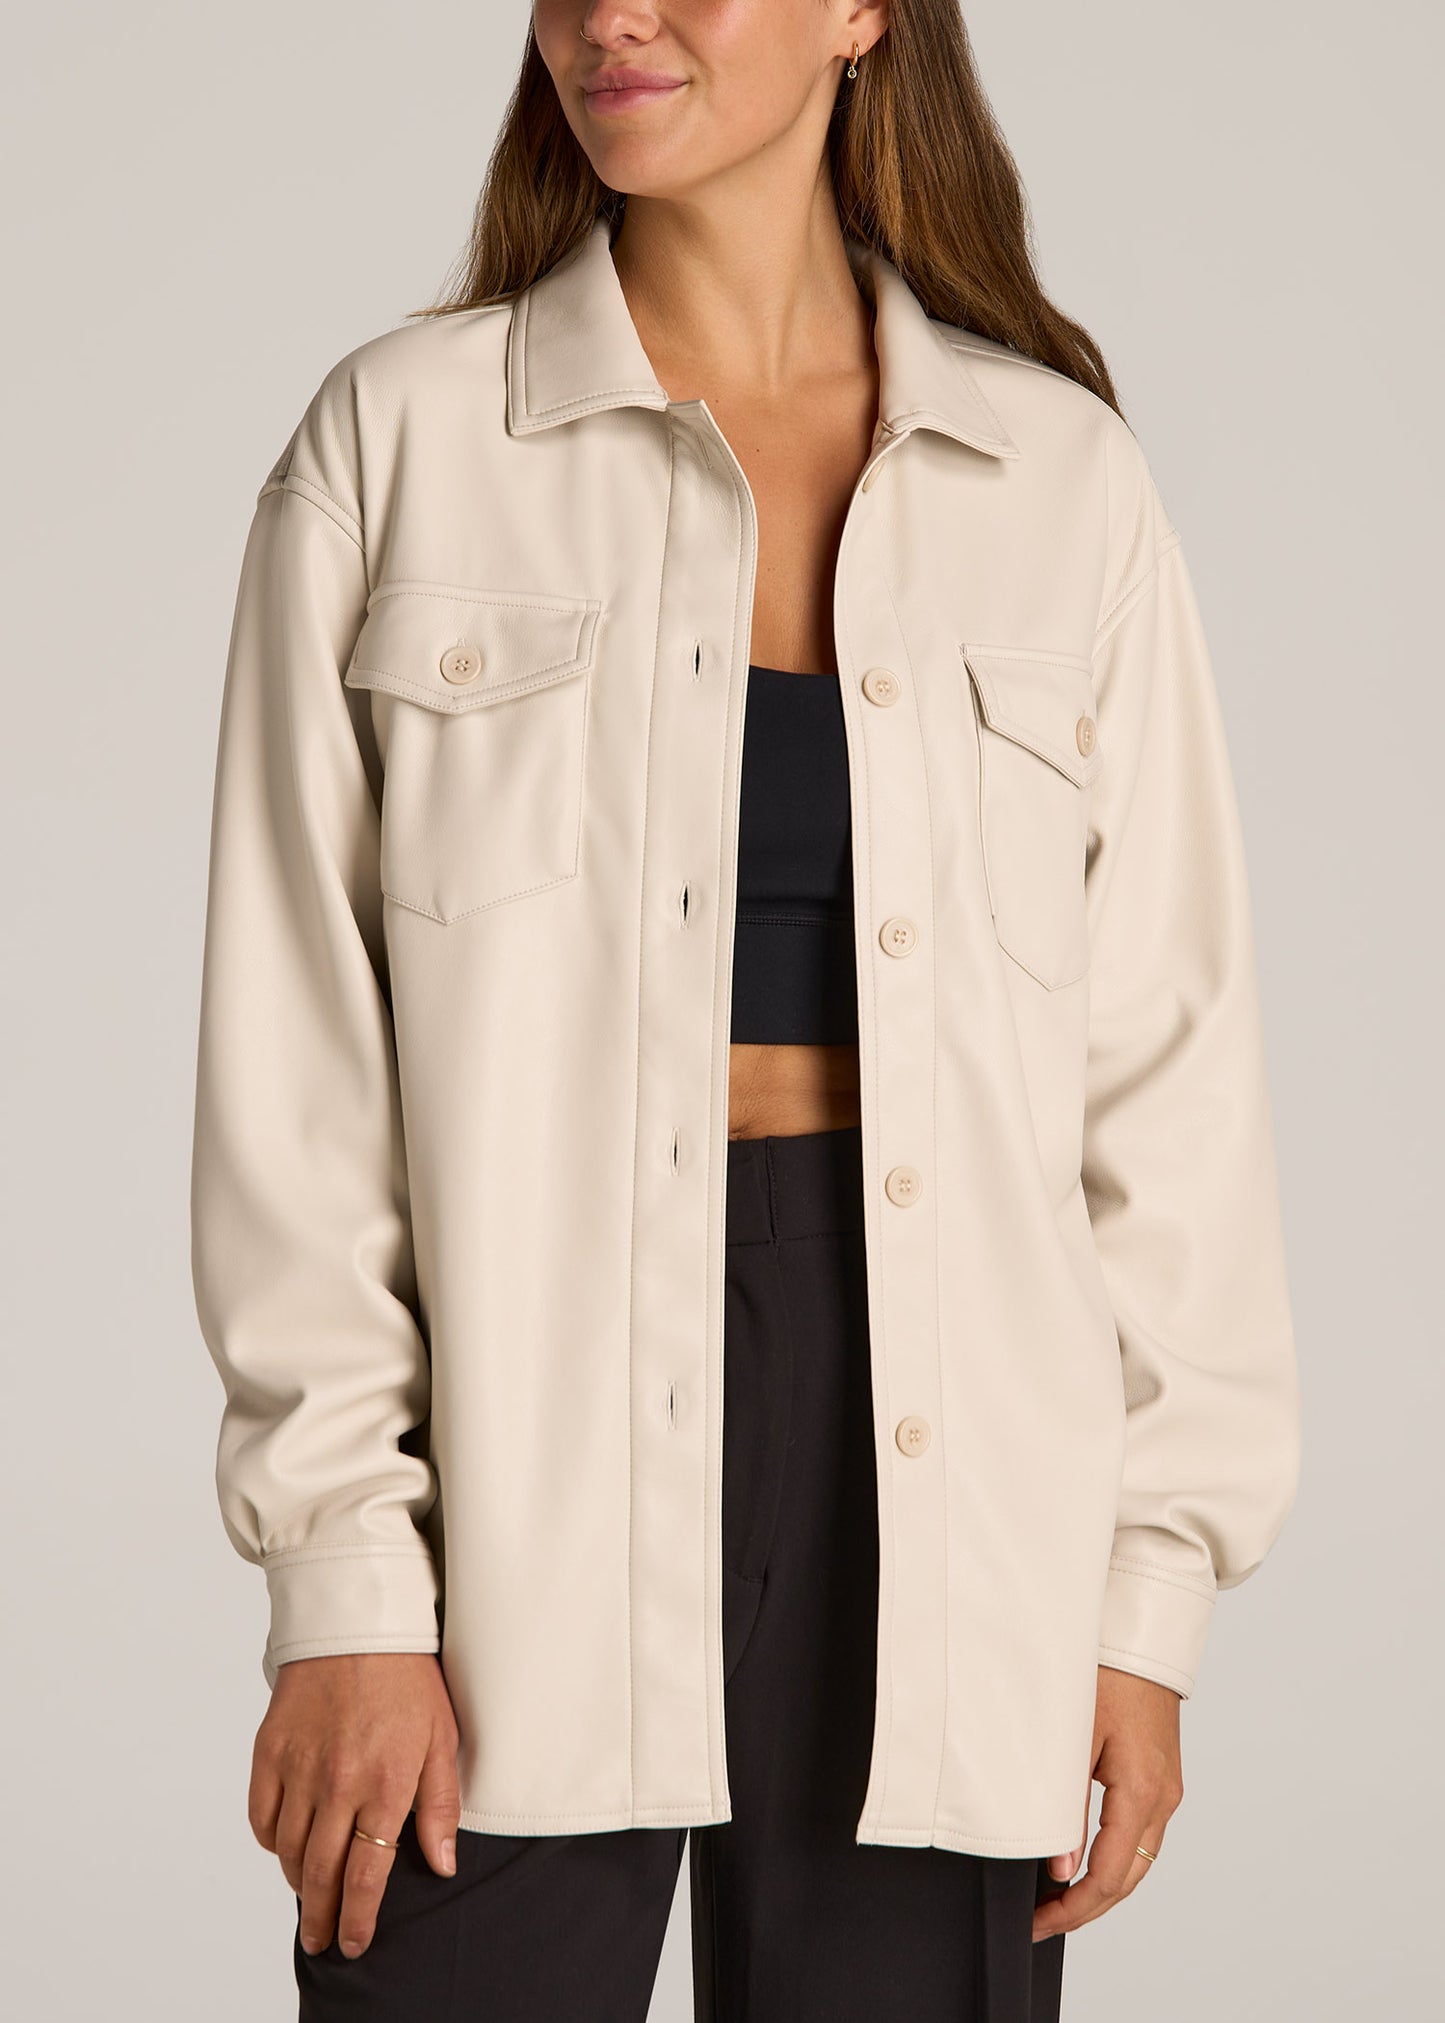 Brooklyn Long Shirt Jacket - Morning Lavender Boutique Outerwear